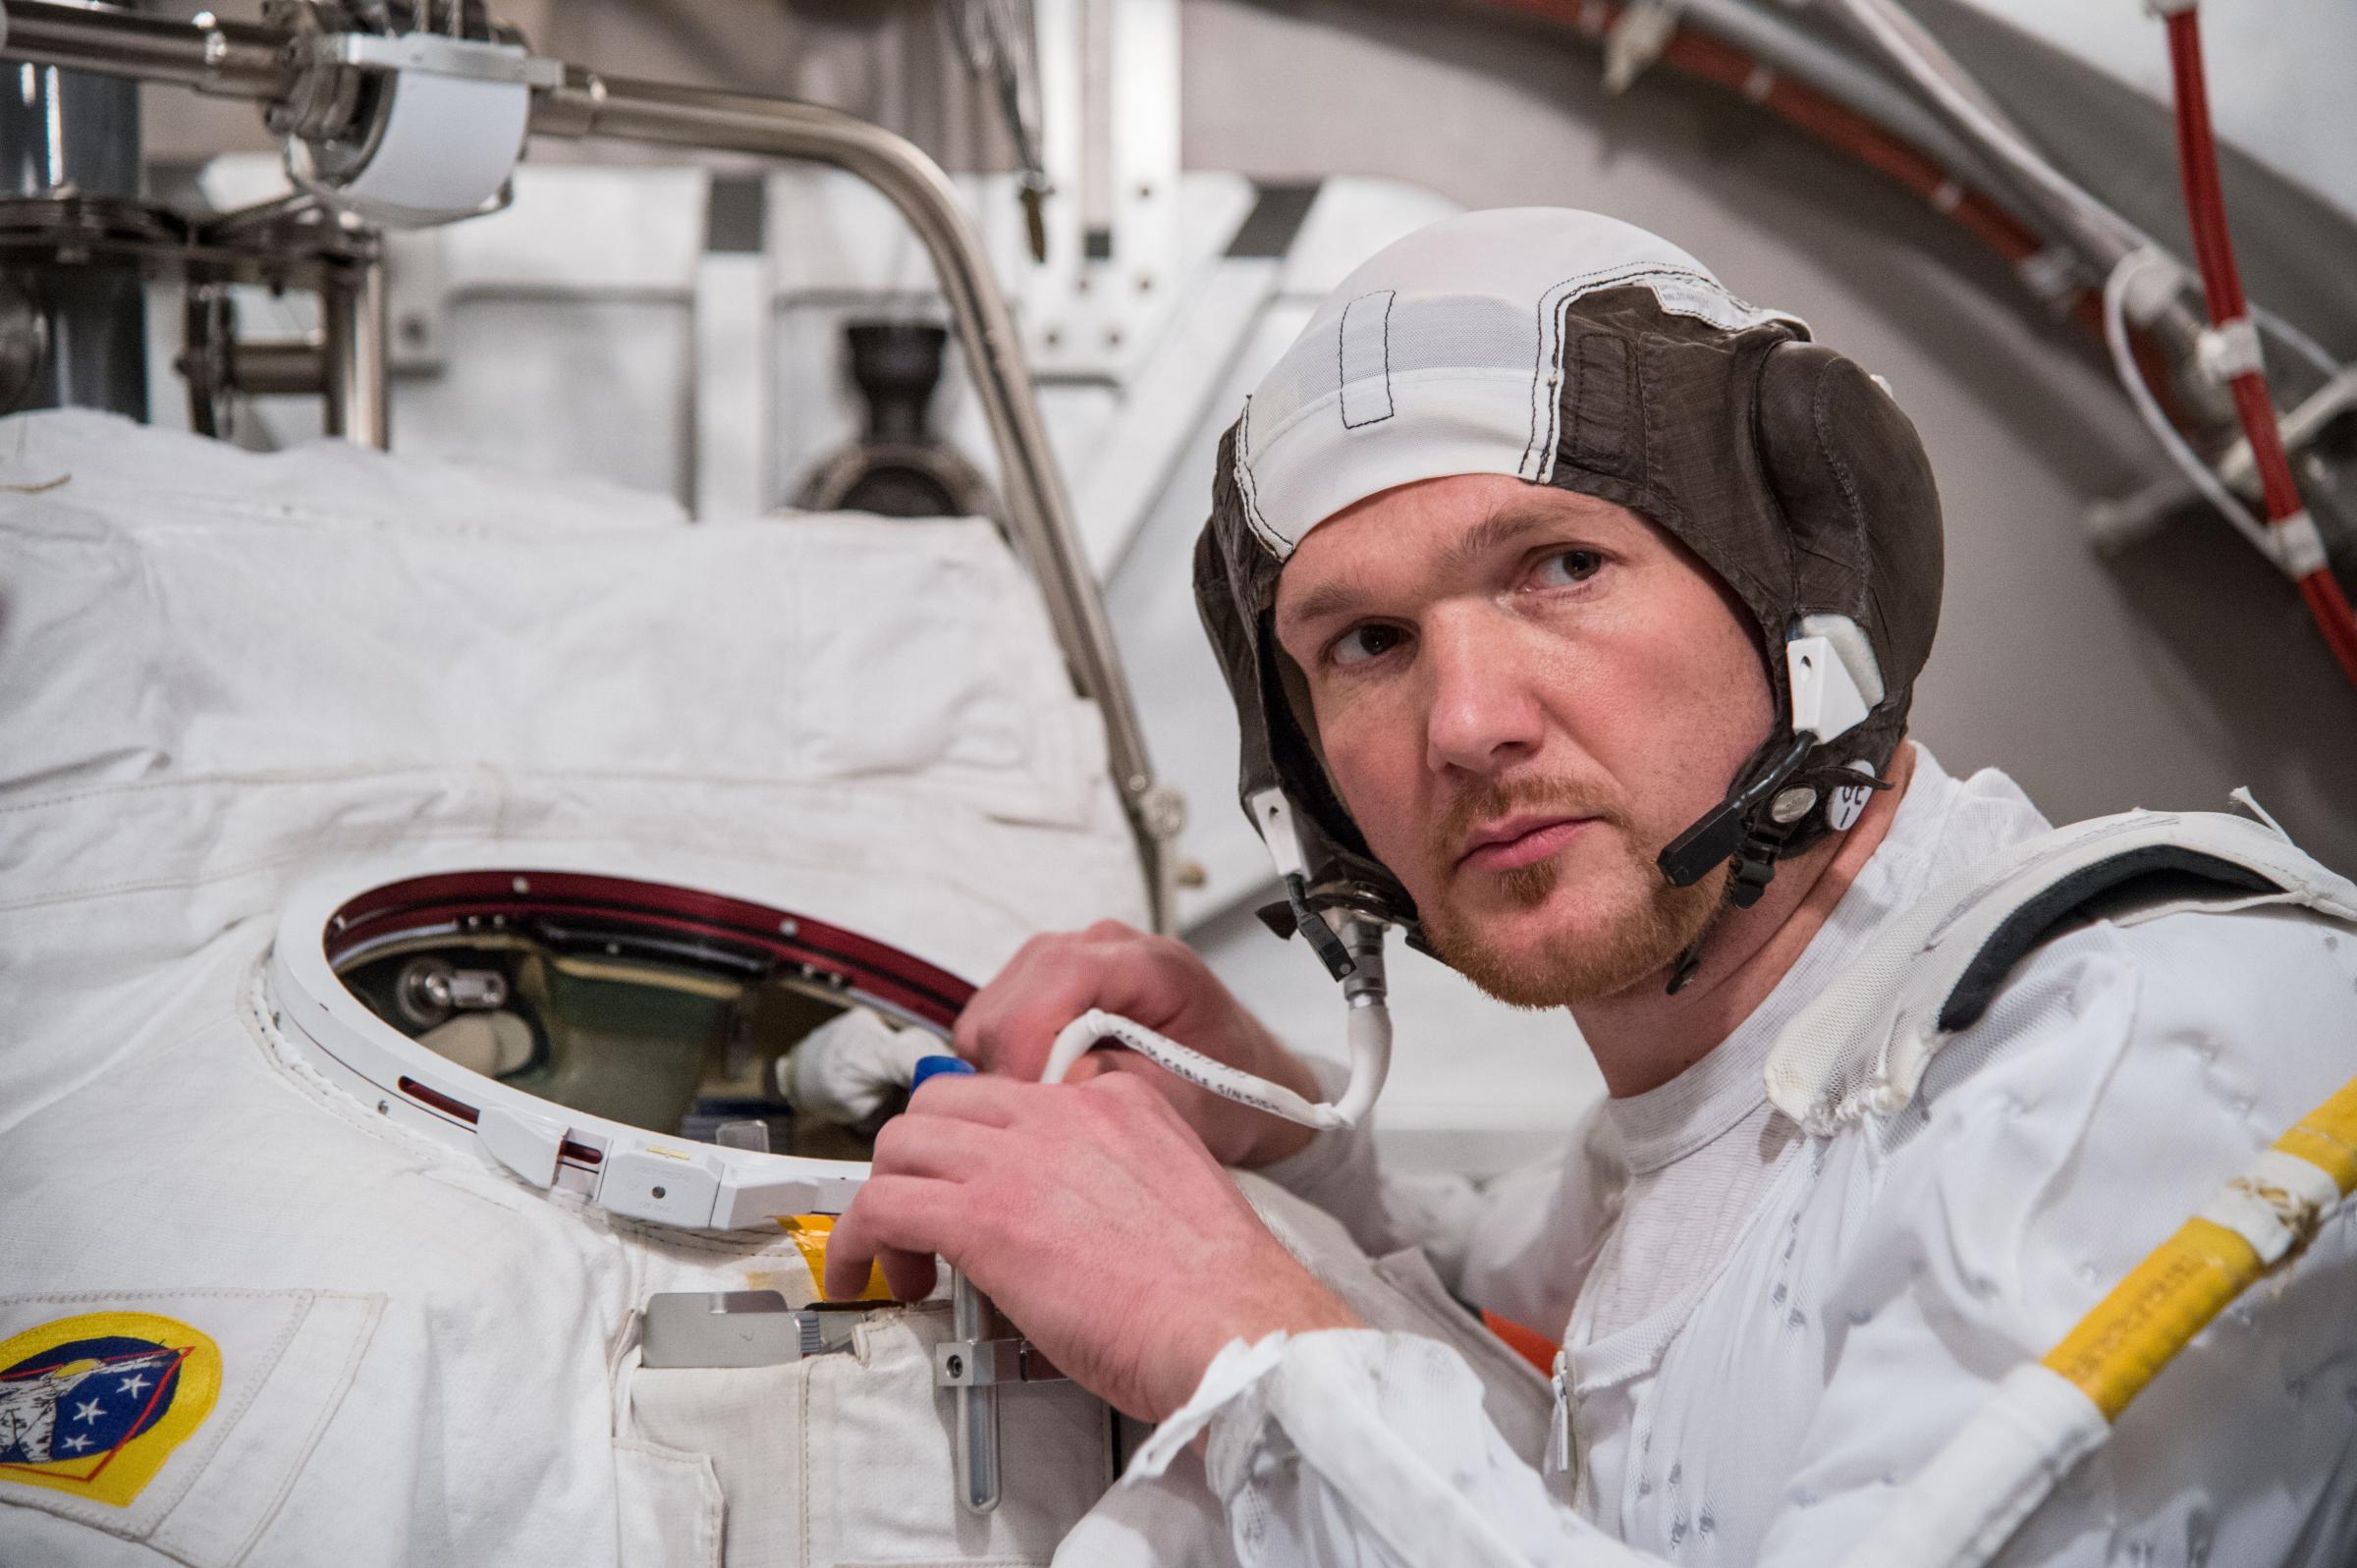 Astronaut Alexander Gerst participates in an Extravehicular Mobility Unit (EMU) spacesuit fit check, in the Space Station Airlock Test Article (SSATA) of the Crew Systems Laboratory at NASA's Johnson Space Center.